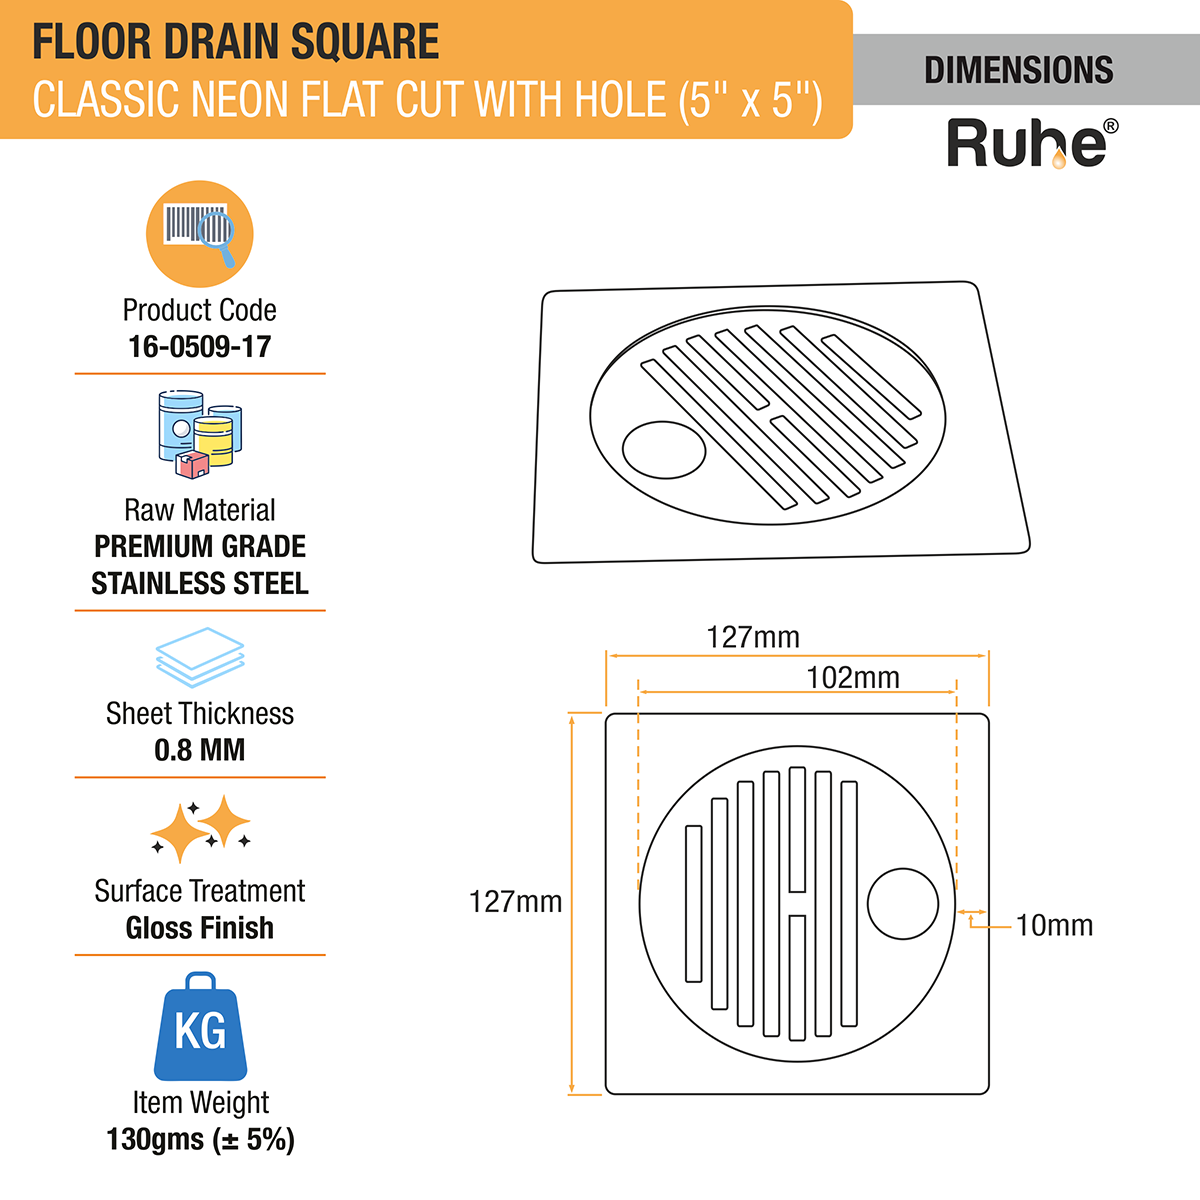 Classic Neon Square Flat Cut Floor Drain (5 x 5 inches) with Hole dimensions and size